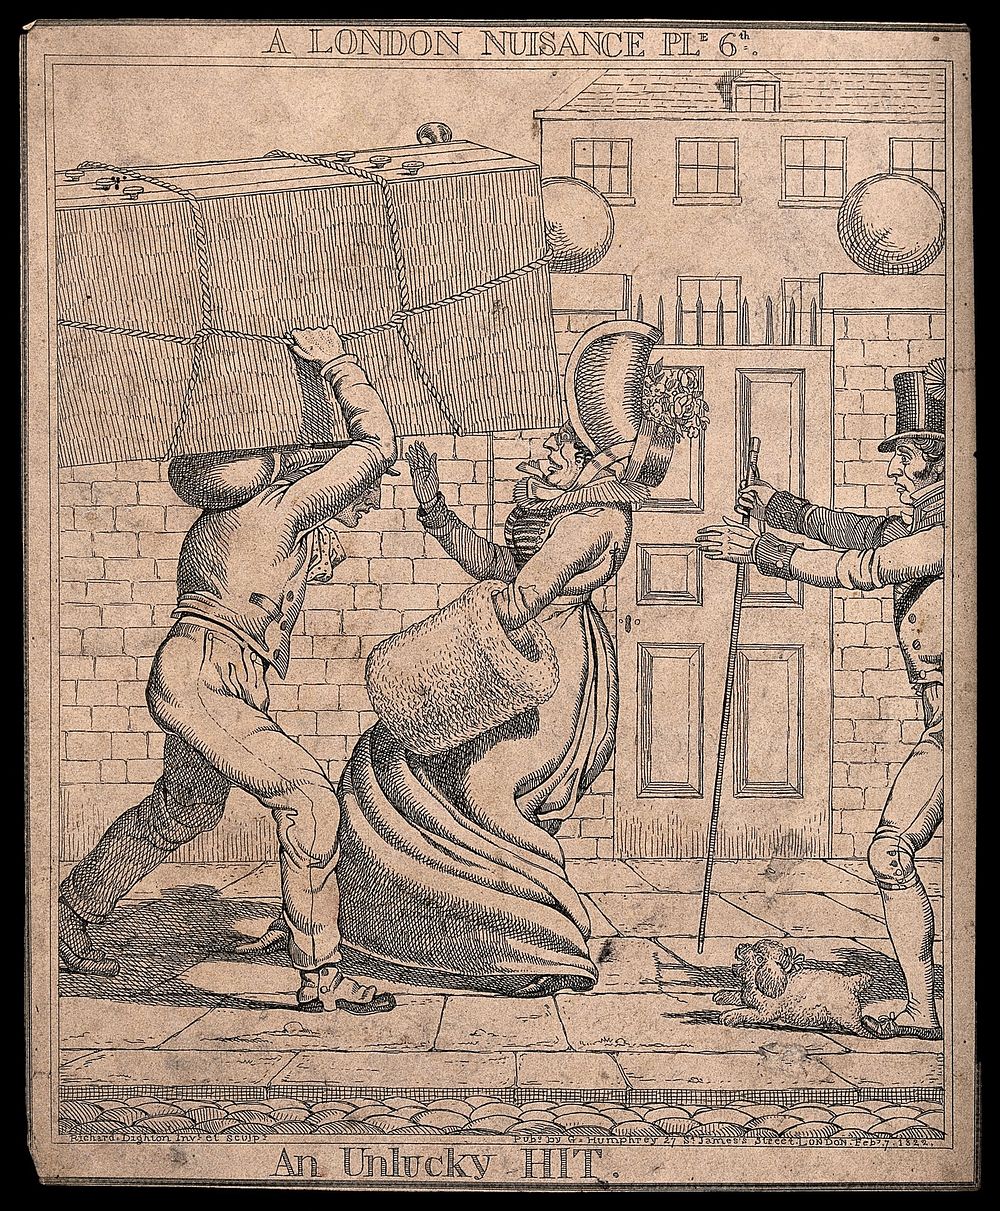 A woman is nearly knocked over by a man carrying a large item on his head. Etching by Richard Dighton, 1821.